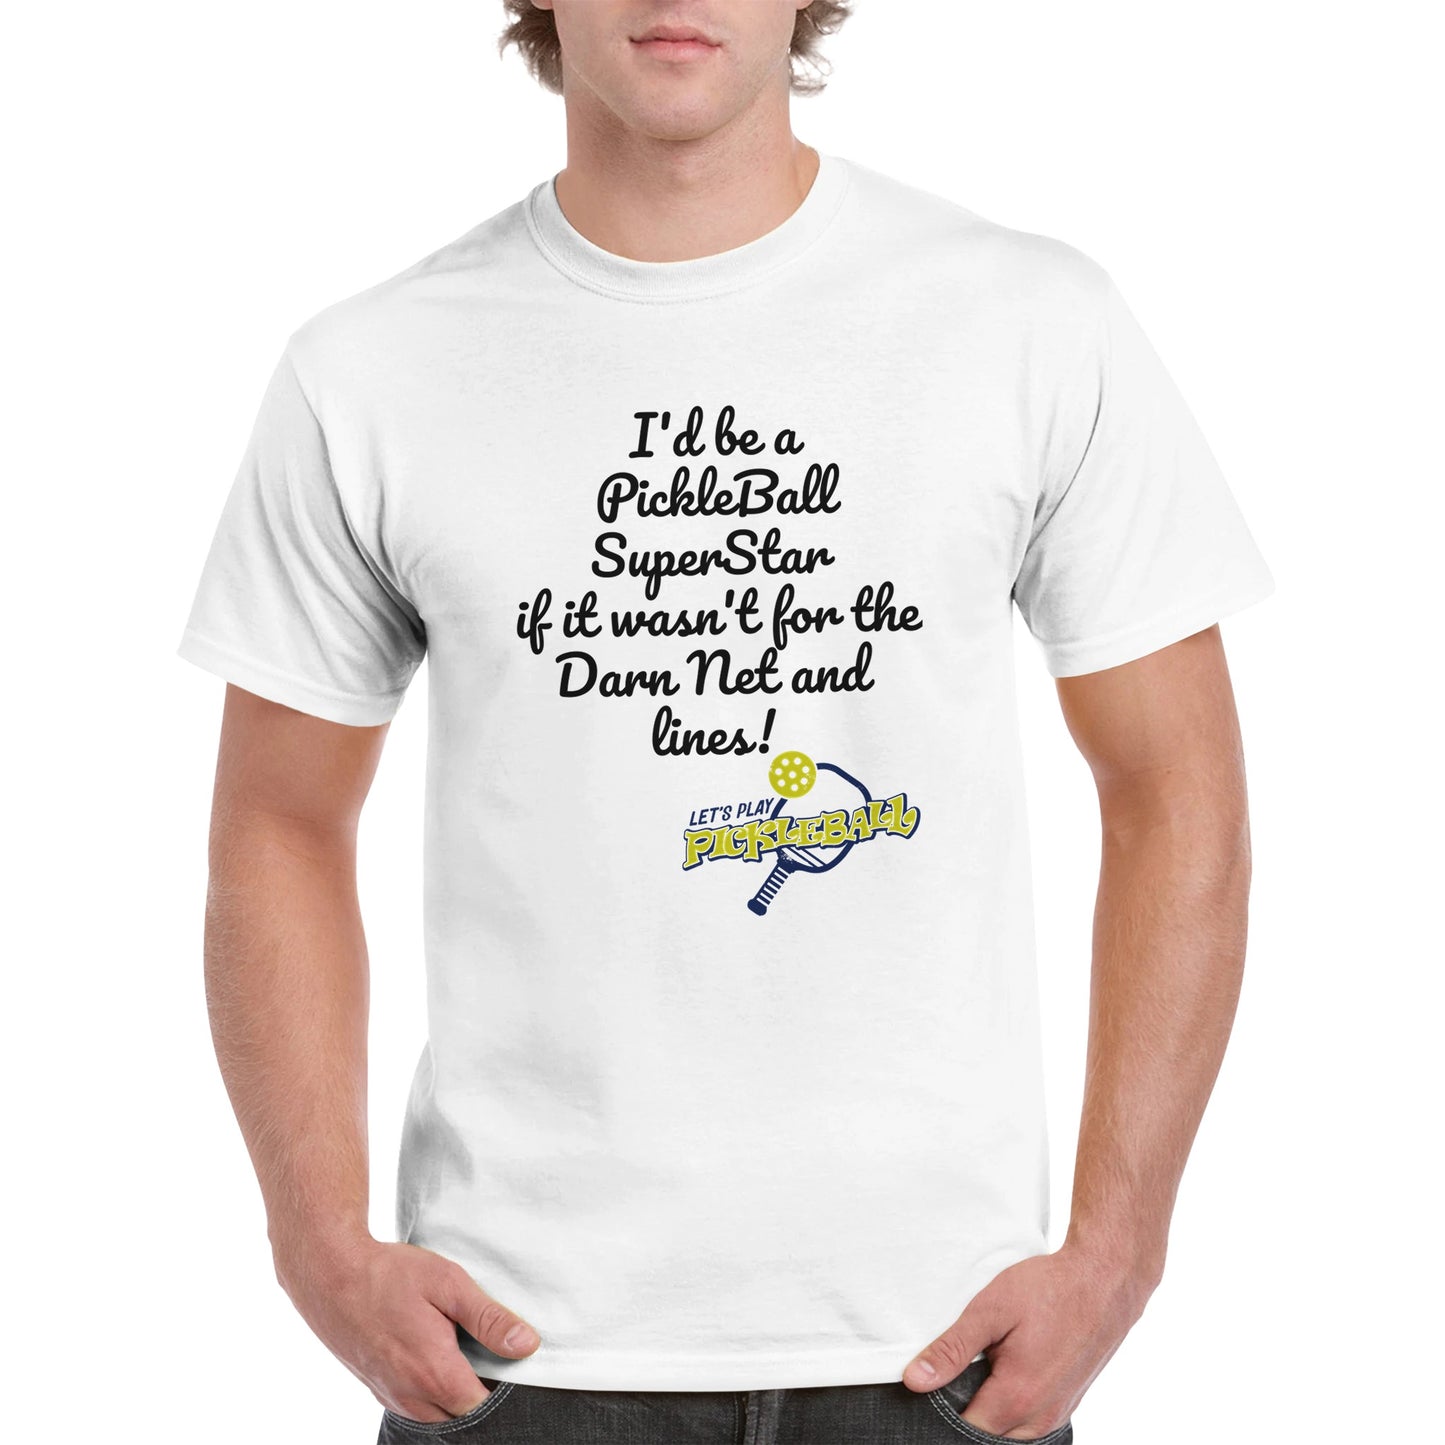 A white comfortable Unisex Crewneck heavyweight cotton t-shirt with funny saying I’d be a PickleBall SuperStar if it wasn’t for the Darn Net and Lines and Let’s Play Pickleball logo on the front from WhatYa Say Apparel worn by blonde-haired male front view.